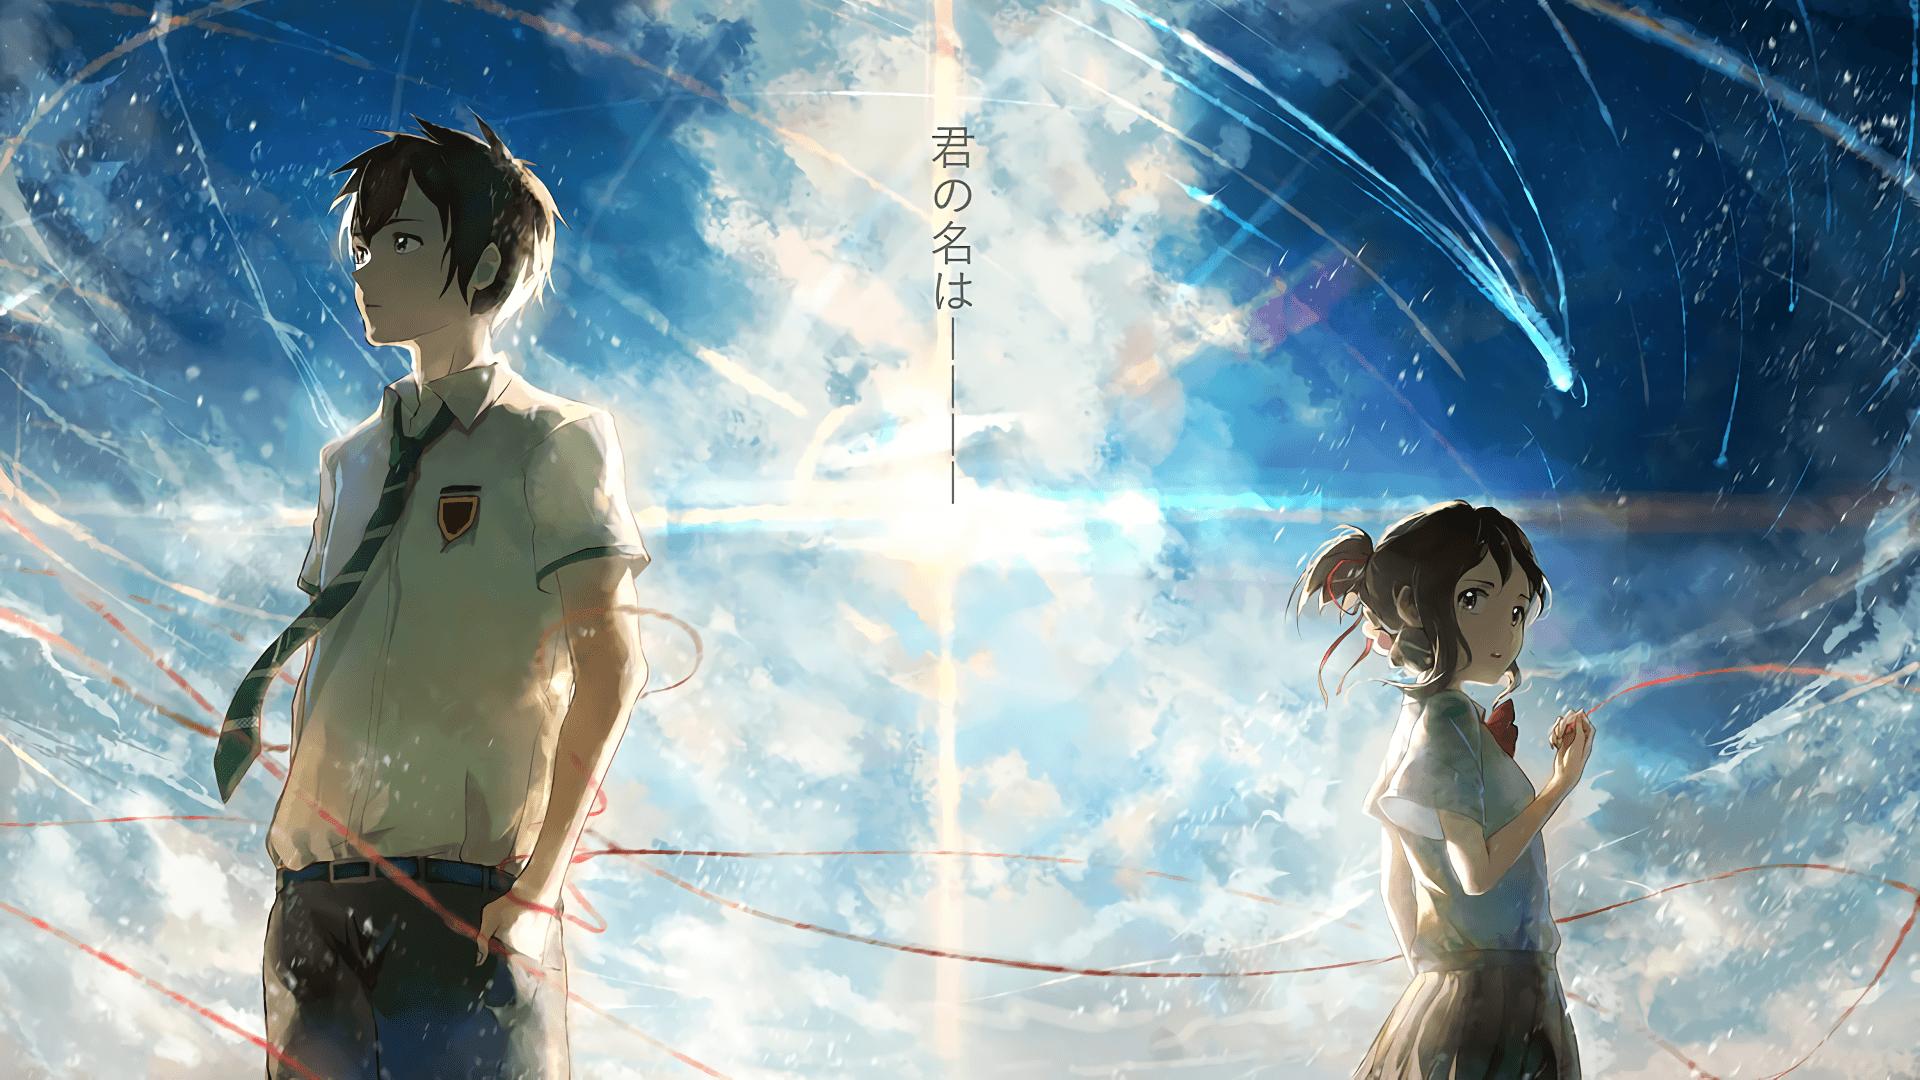 Your Name Wallpapers Hd For Pc, your name, Anime